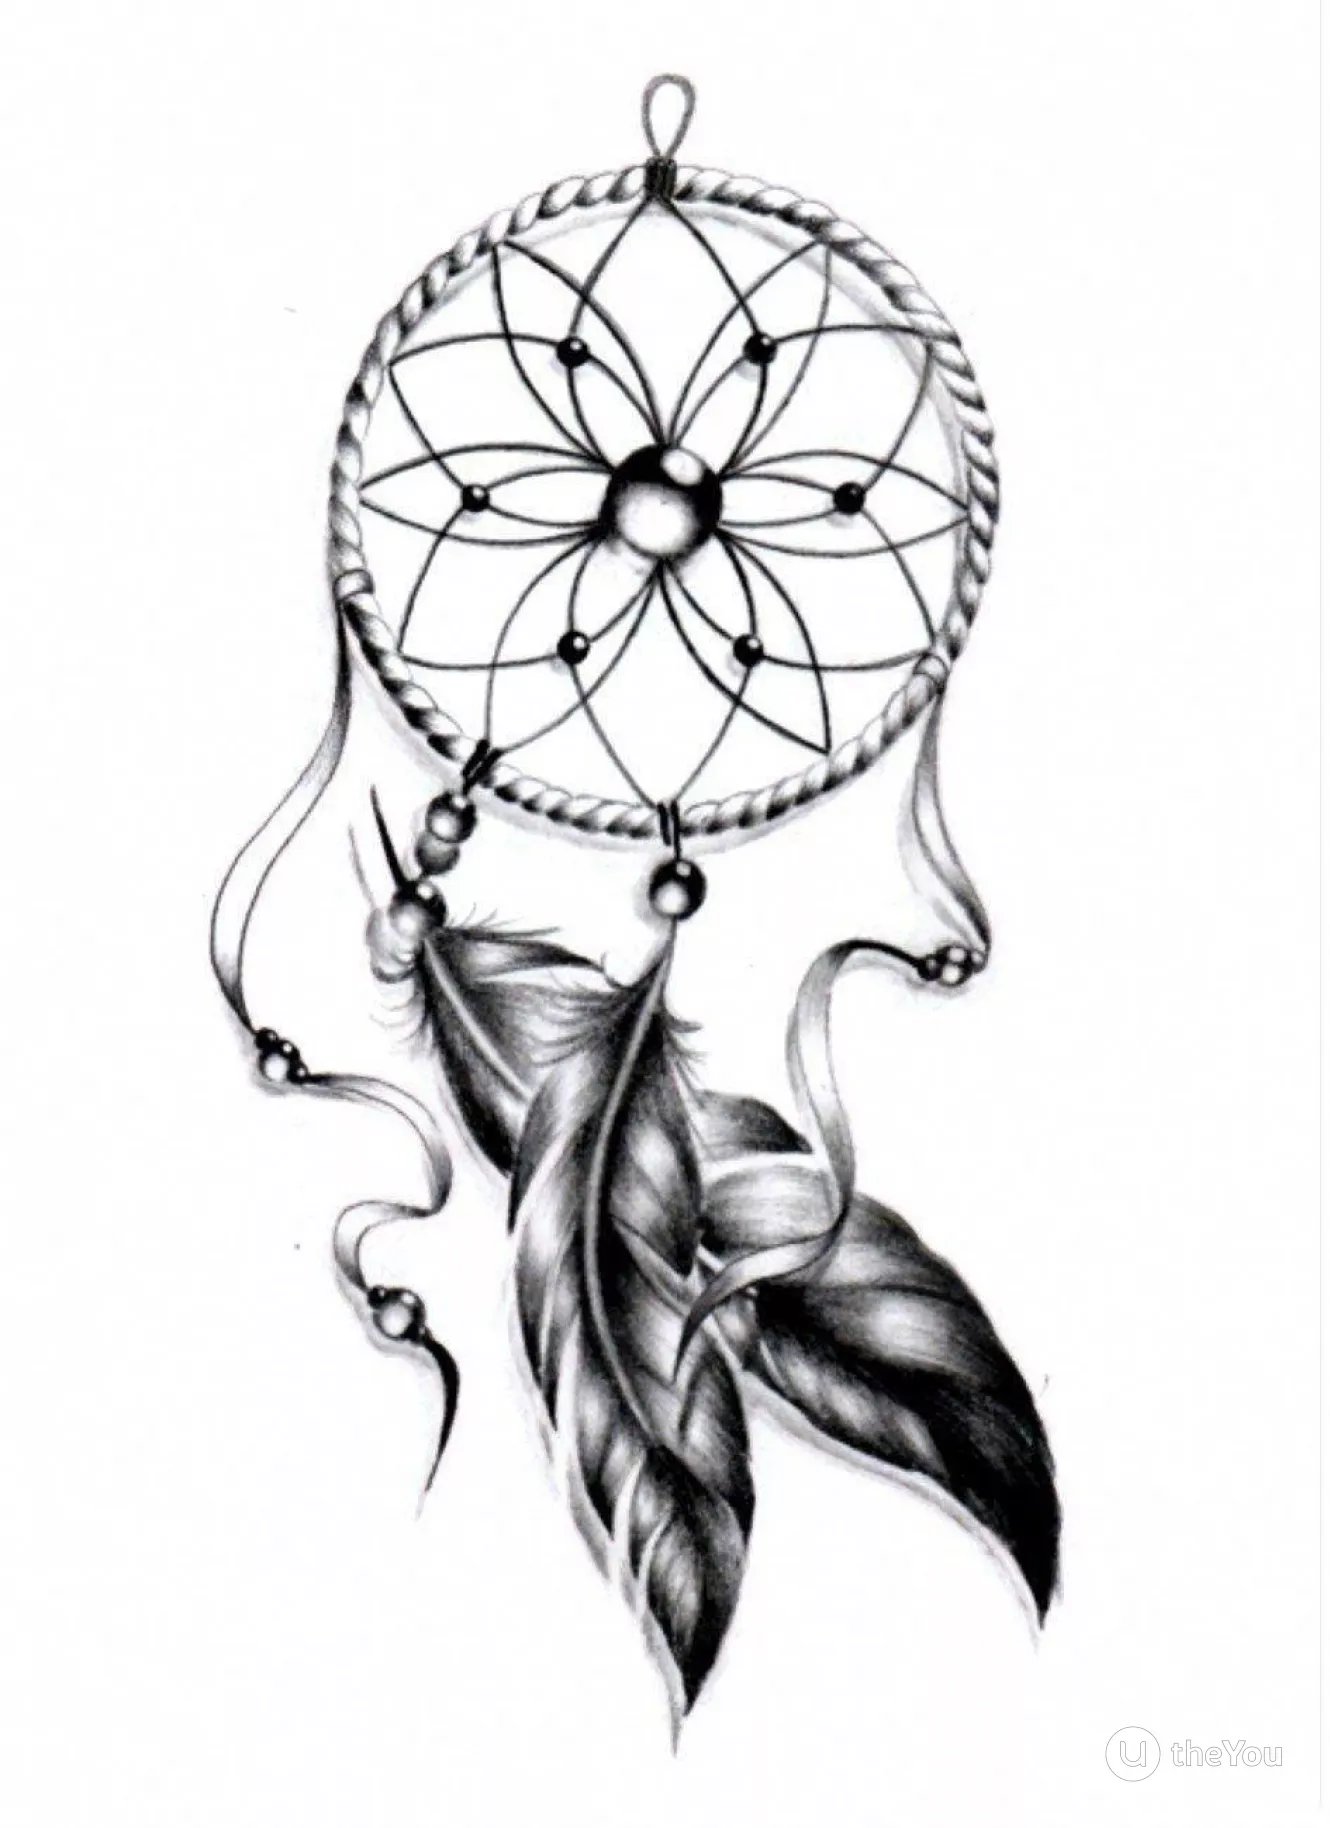 Dreamcatcher Tattoo Meaning - Tattoos With Meaning